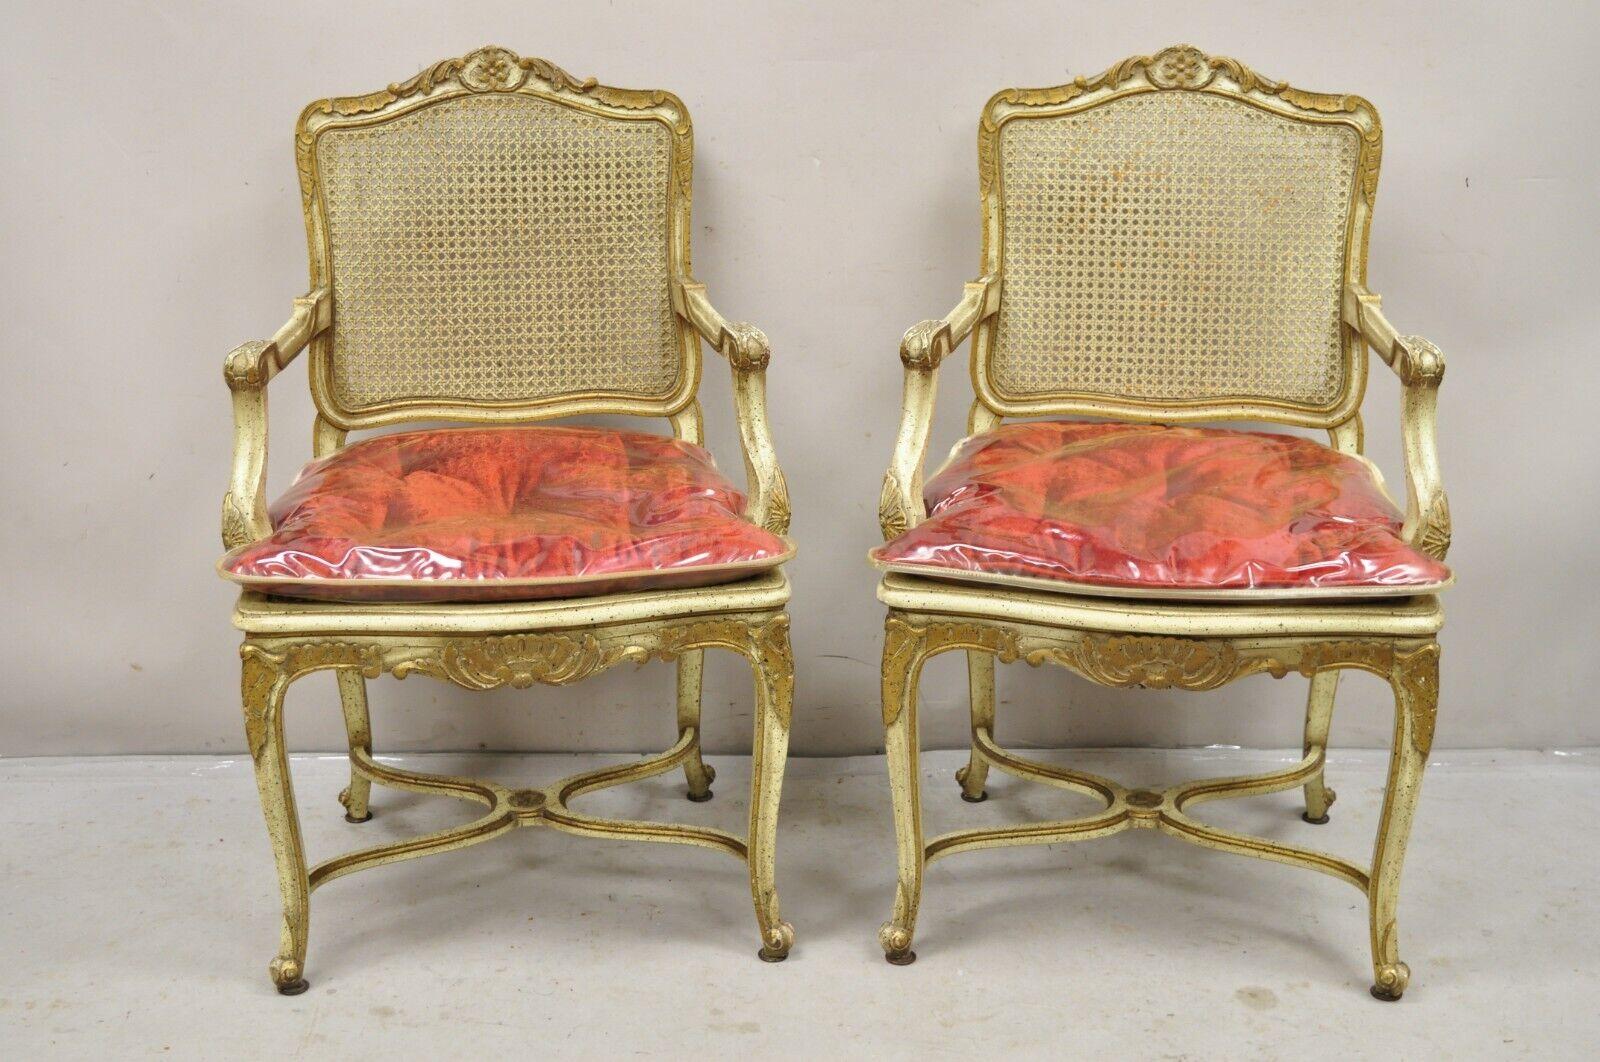 Vintage French Louis XV Style Cream Painted Carved Wood Cane Fauteuil Arm Chairs - a Pair. Circa Mid 20th Century. Measurements: 38